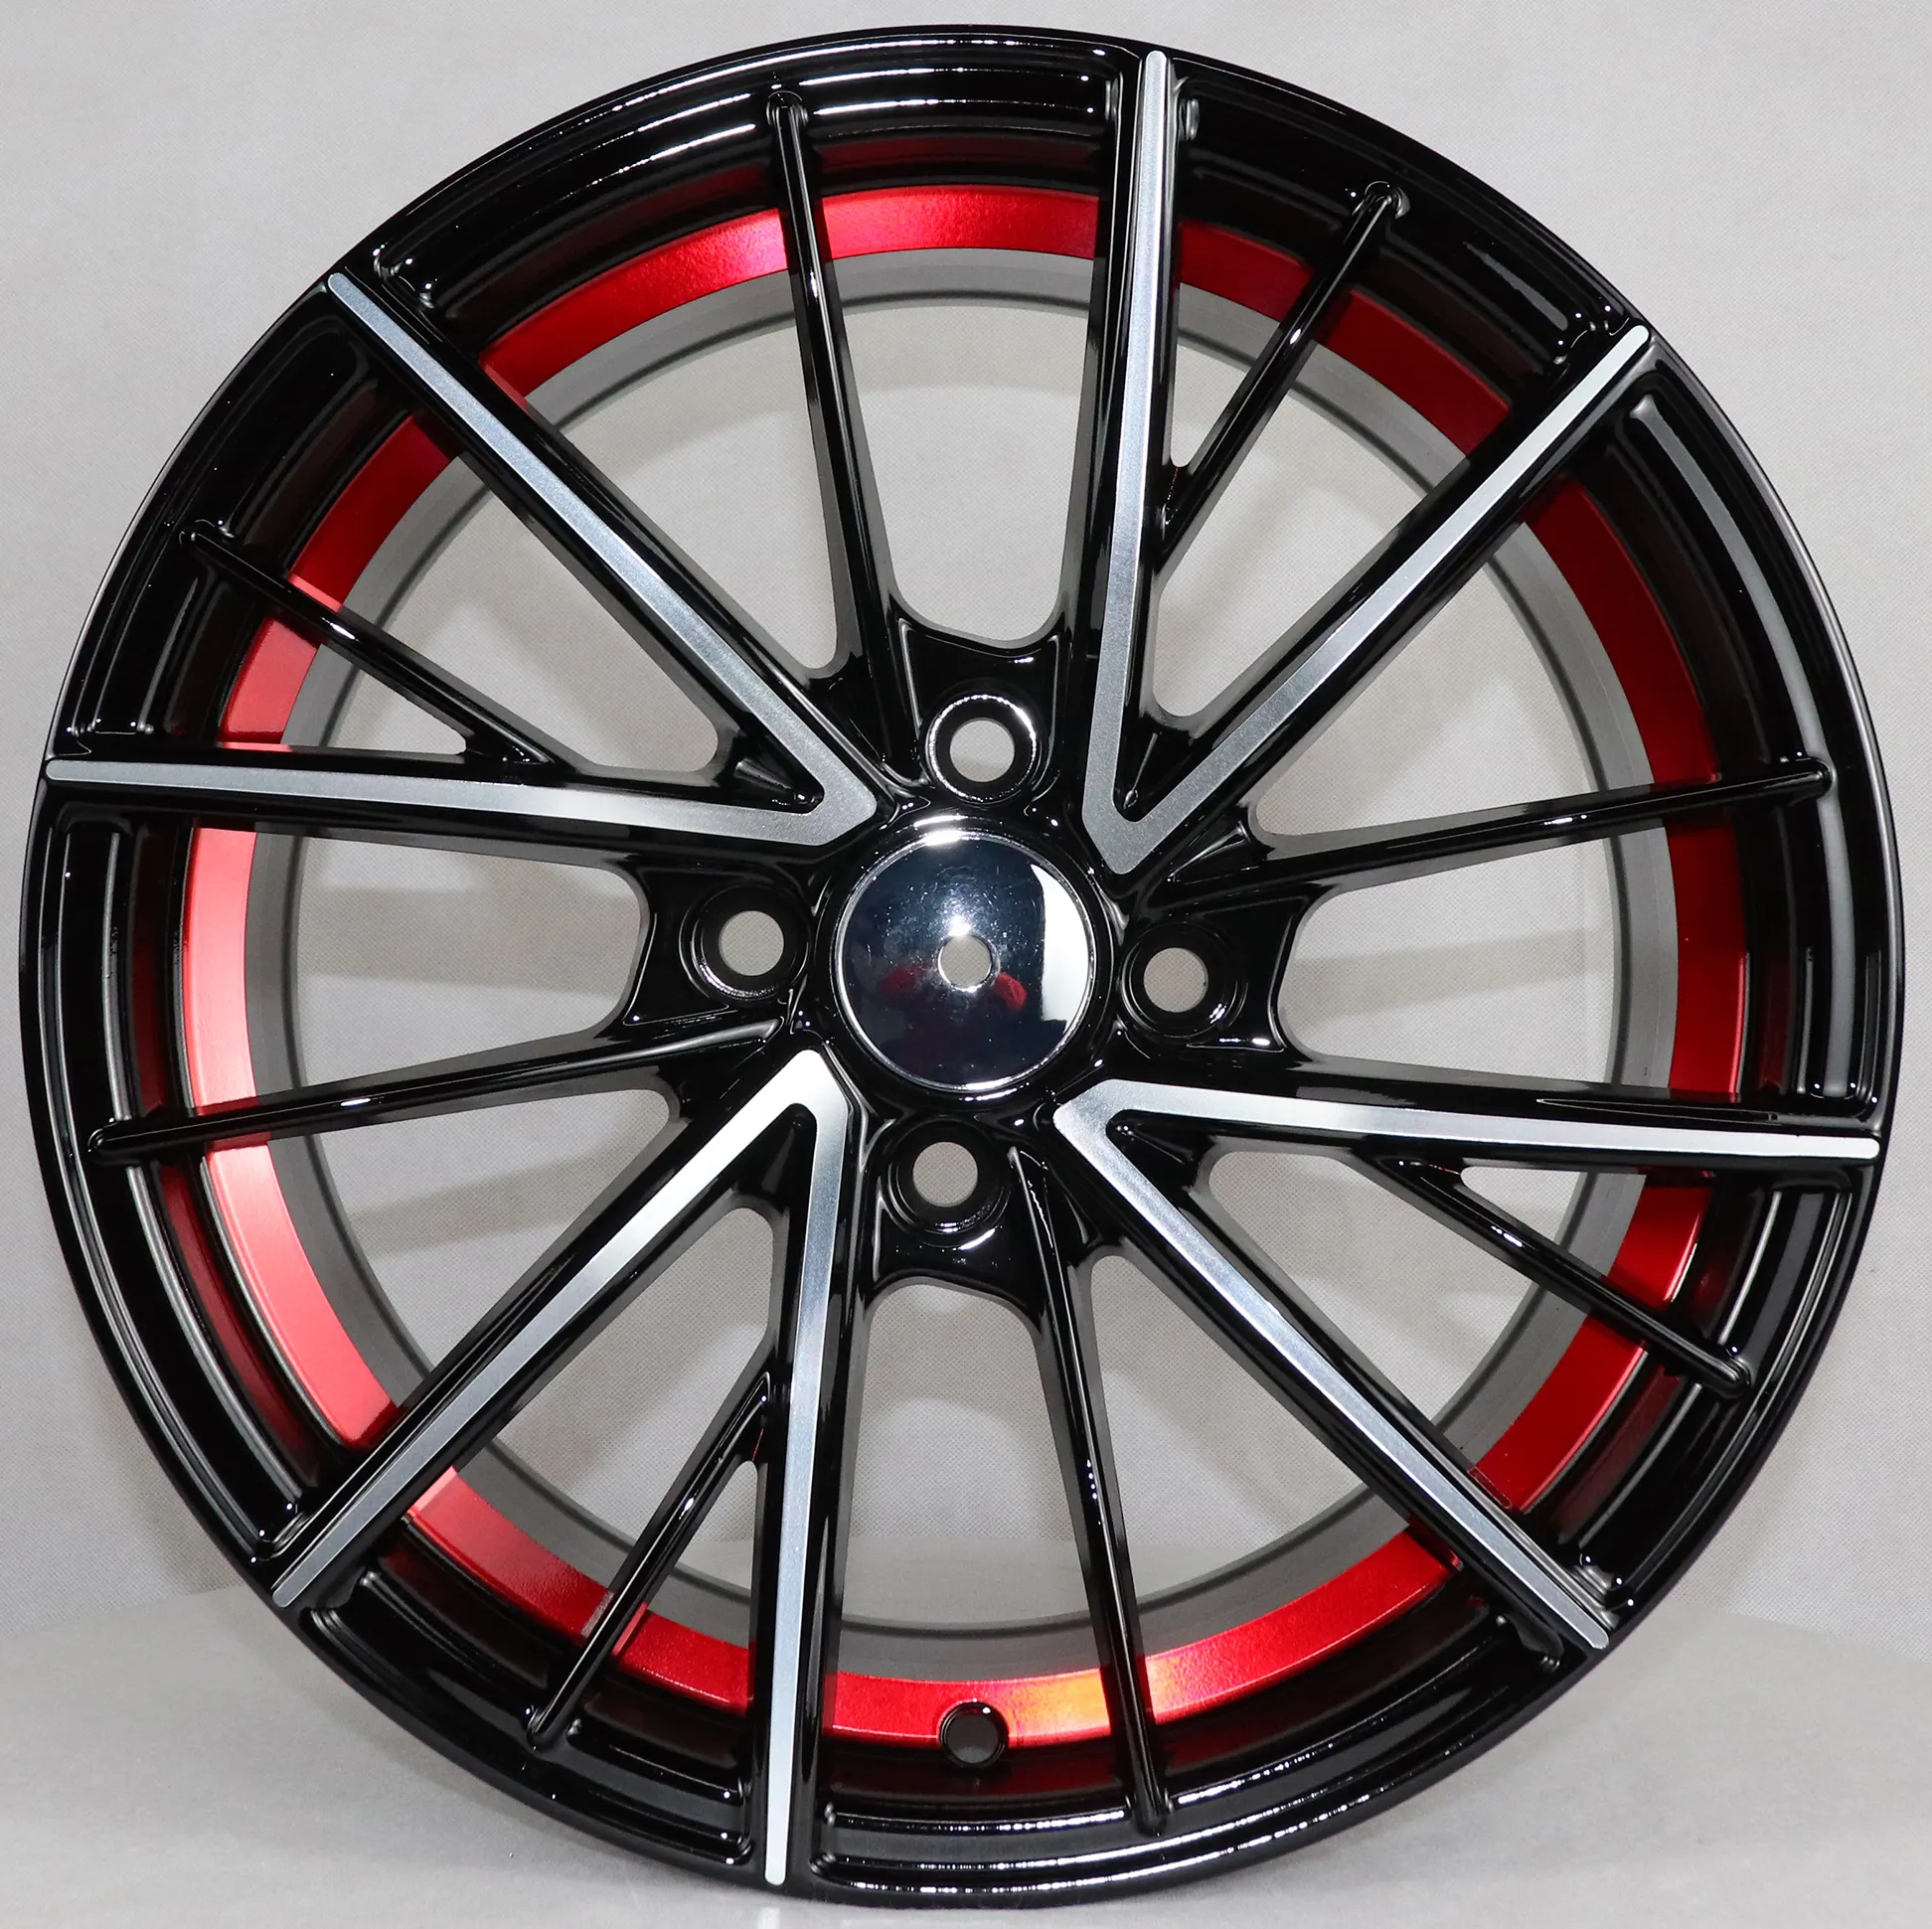 JT181 Black and red finish passenger car rims size 15 pcd 100 alloy wheels 4 hole 5 hole